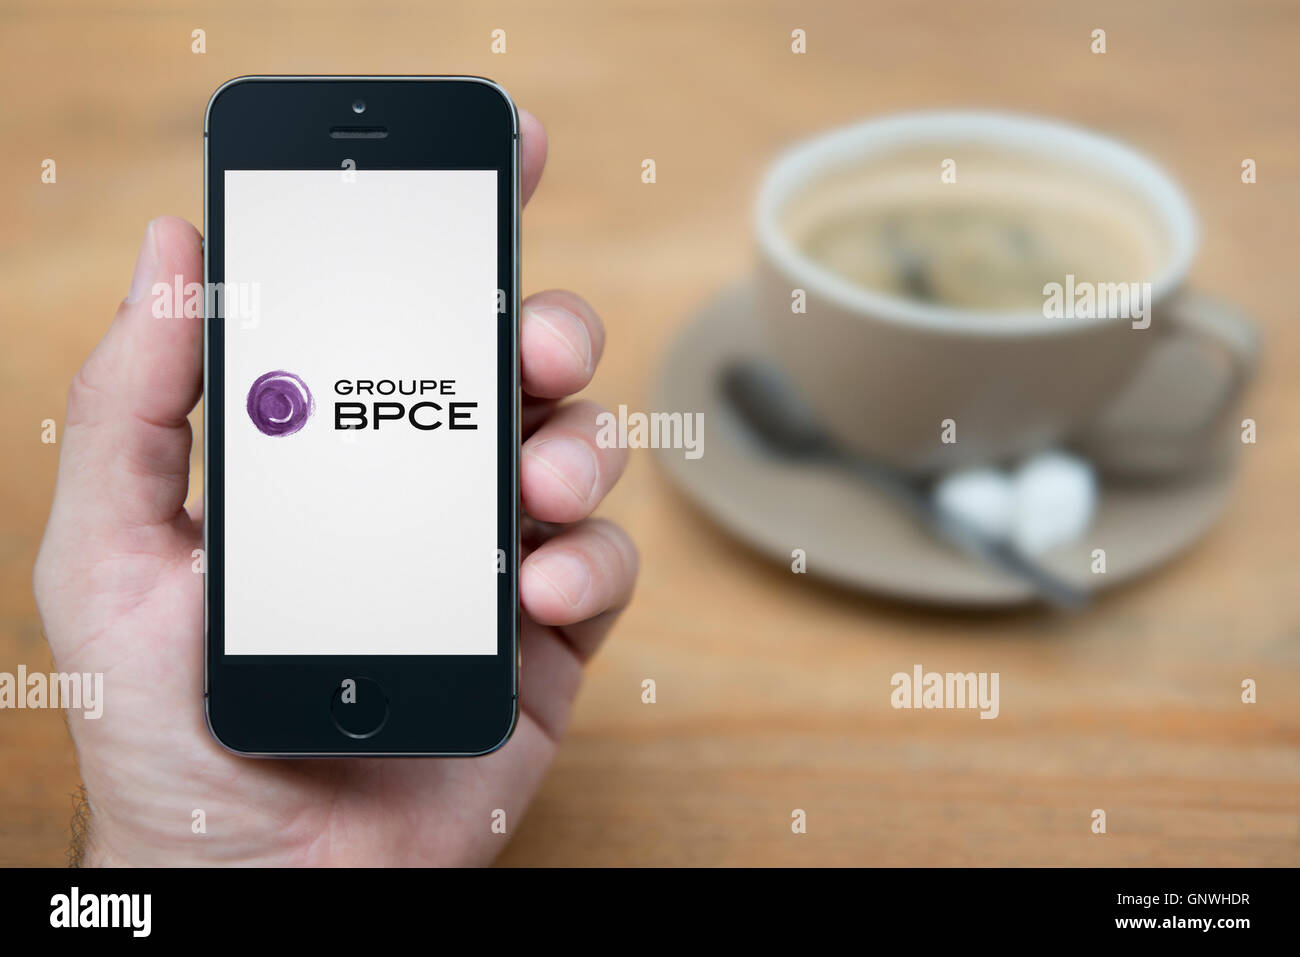 A man looks at his iPhone which displays the Groupe BPCE bank logo, while sat with a cup of coffee (Editorial use only). Stock Photo